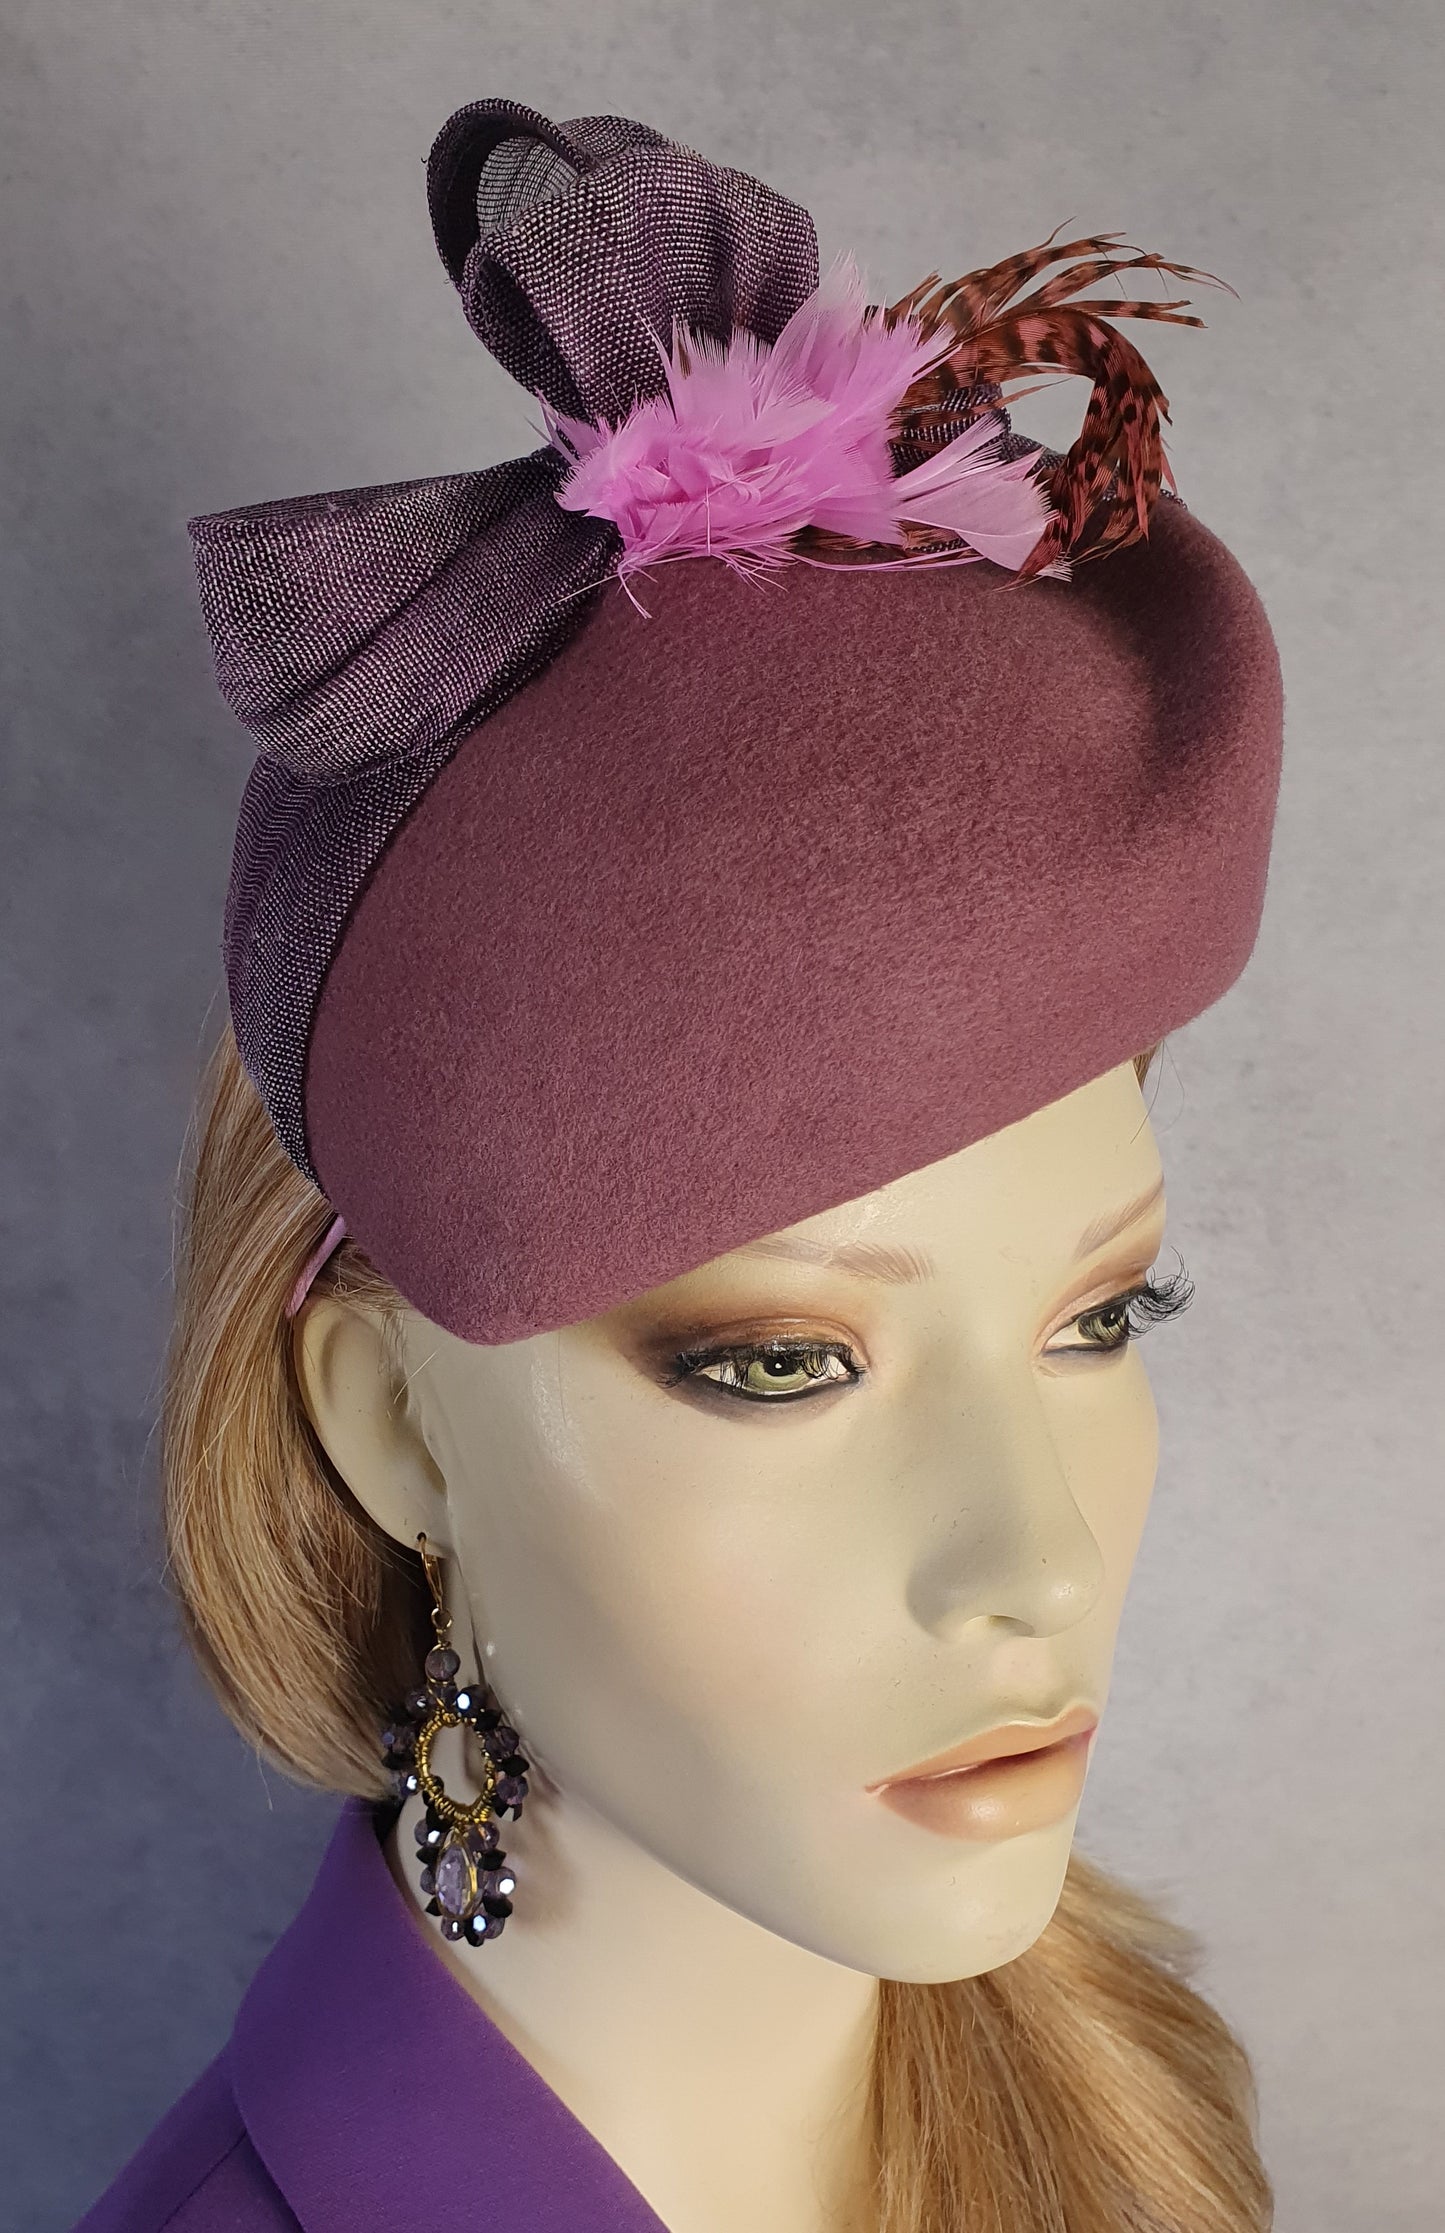 Fascinator handmade in felt with abaca silk, elegant headdress with pheasant feathers, perfect for autumn &amp; winter and special occasions